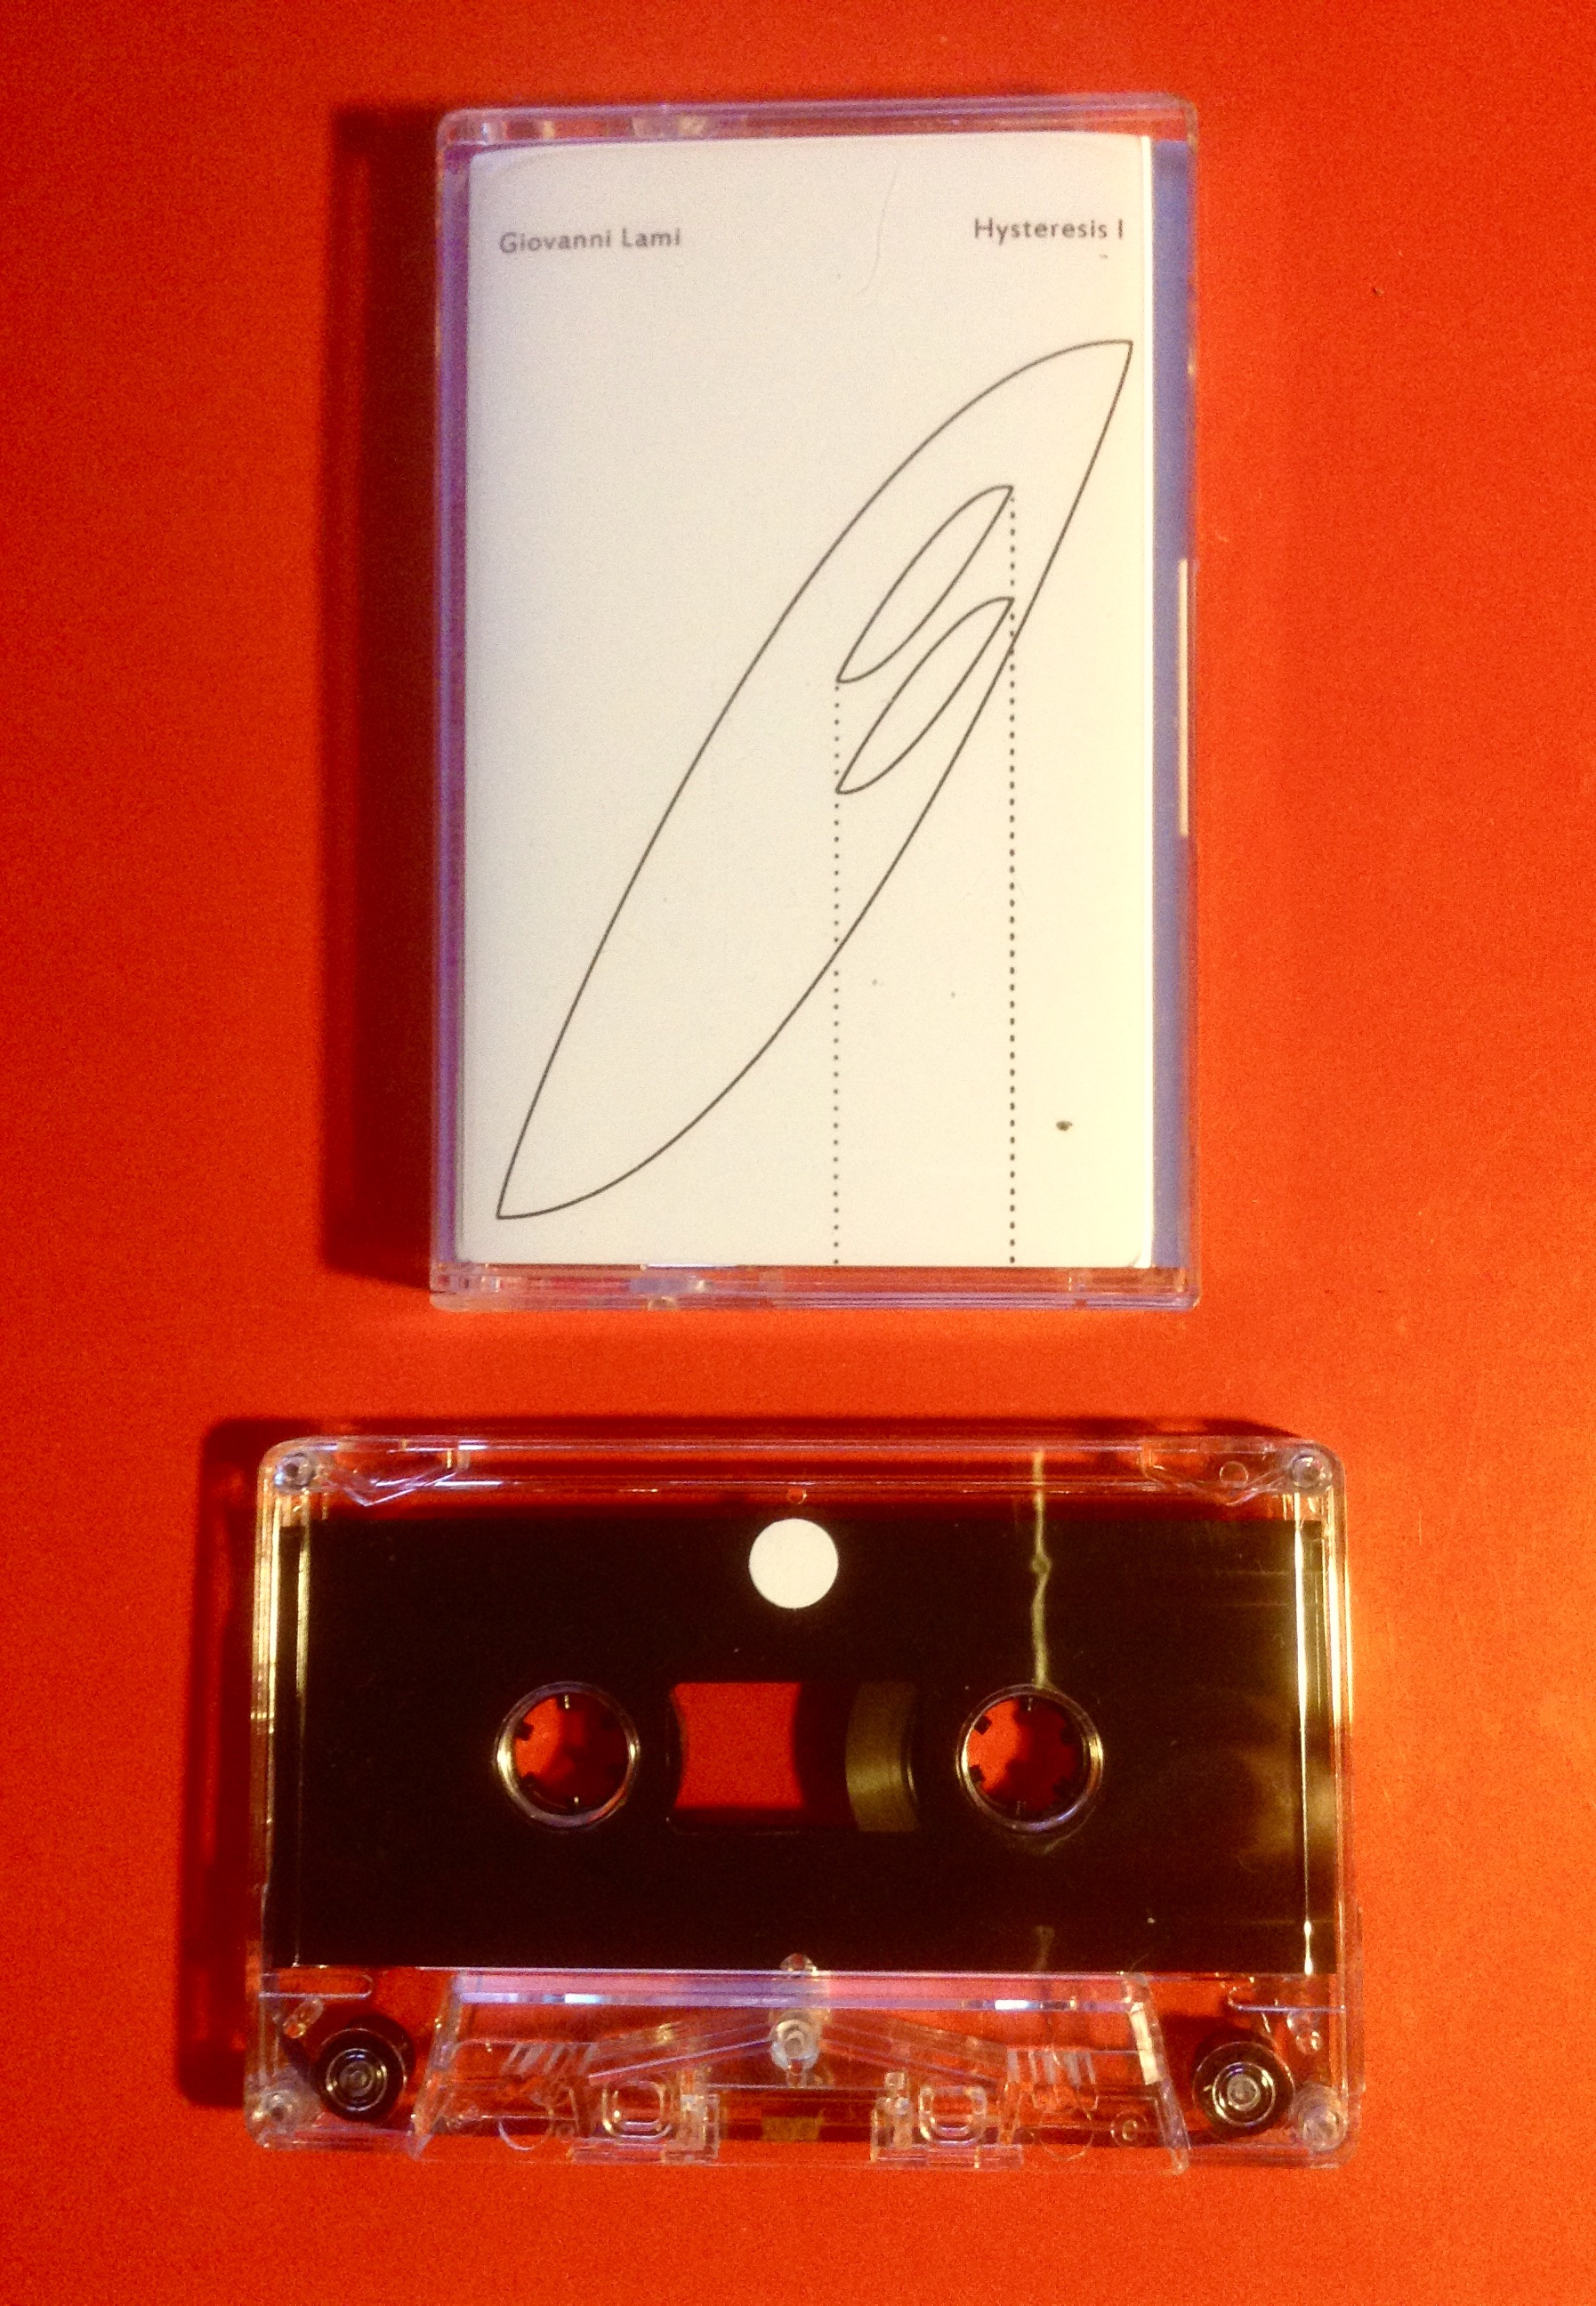 Cassette Review! Giovanni Lami – Hysteresis I